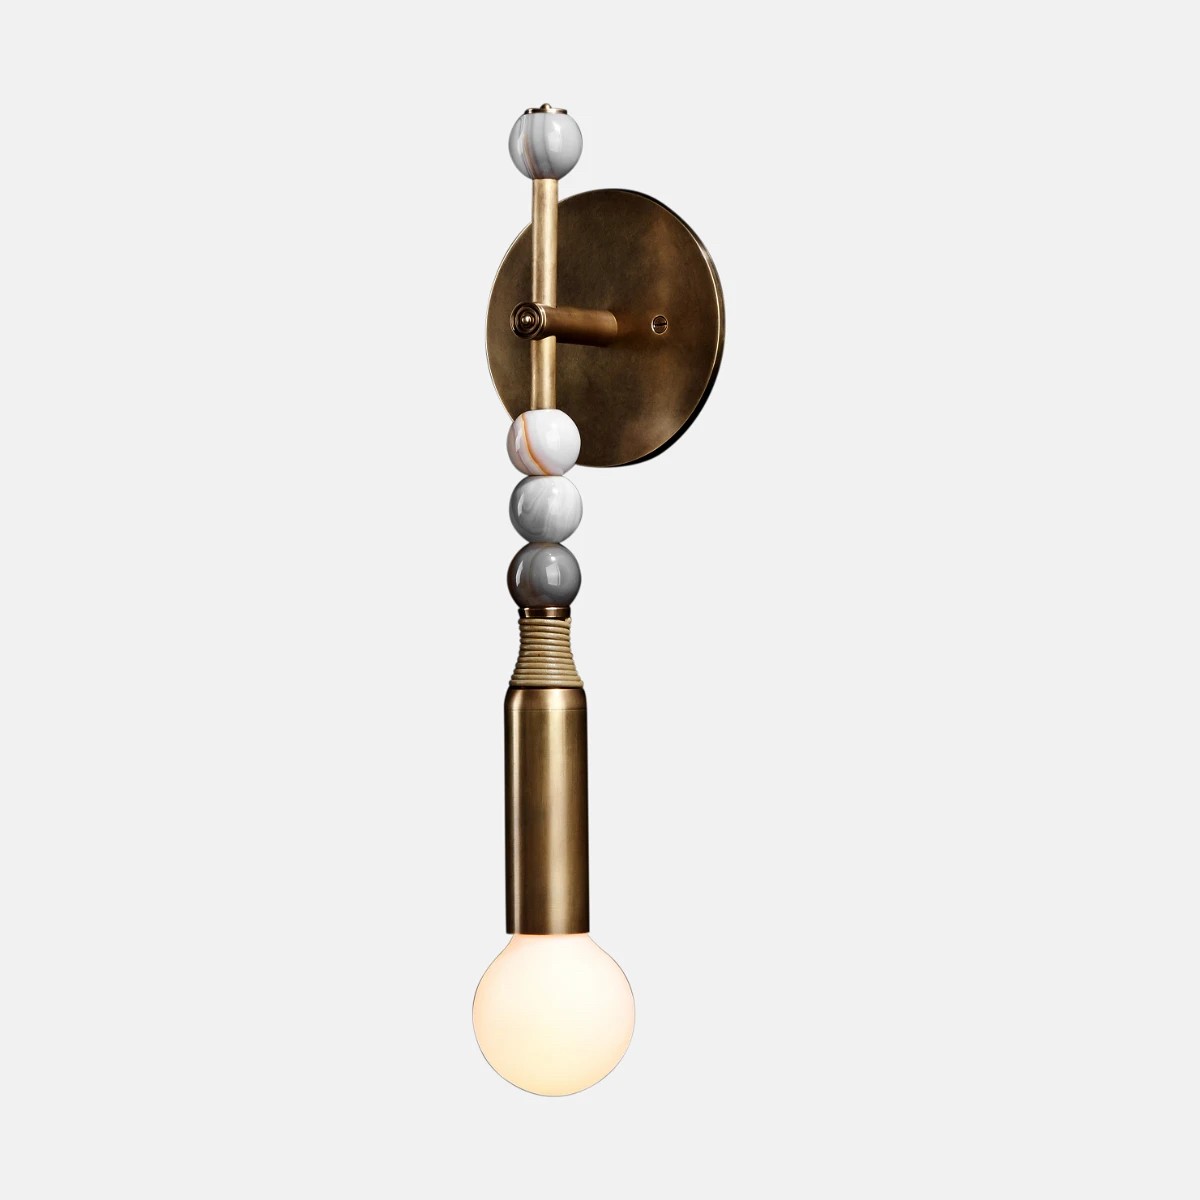 The image of an Talisman 1 Sconce product